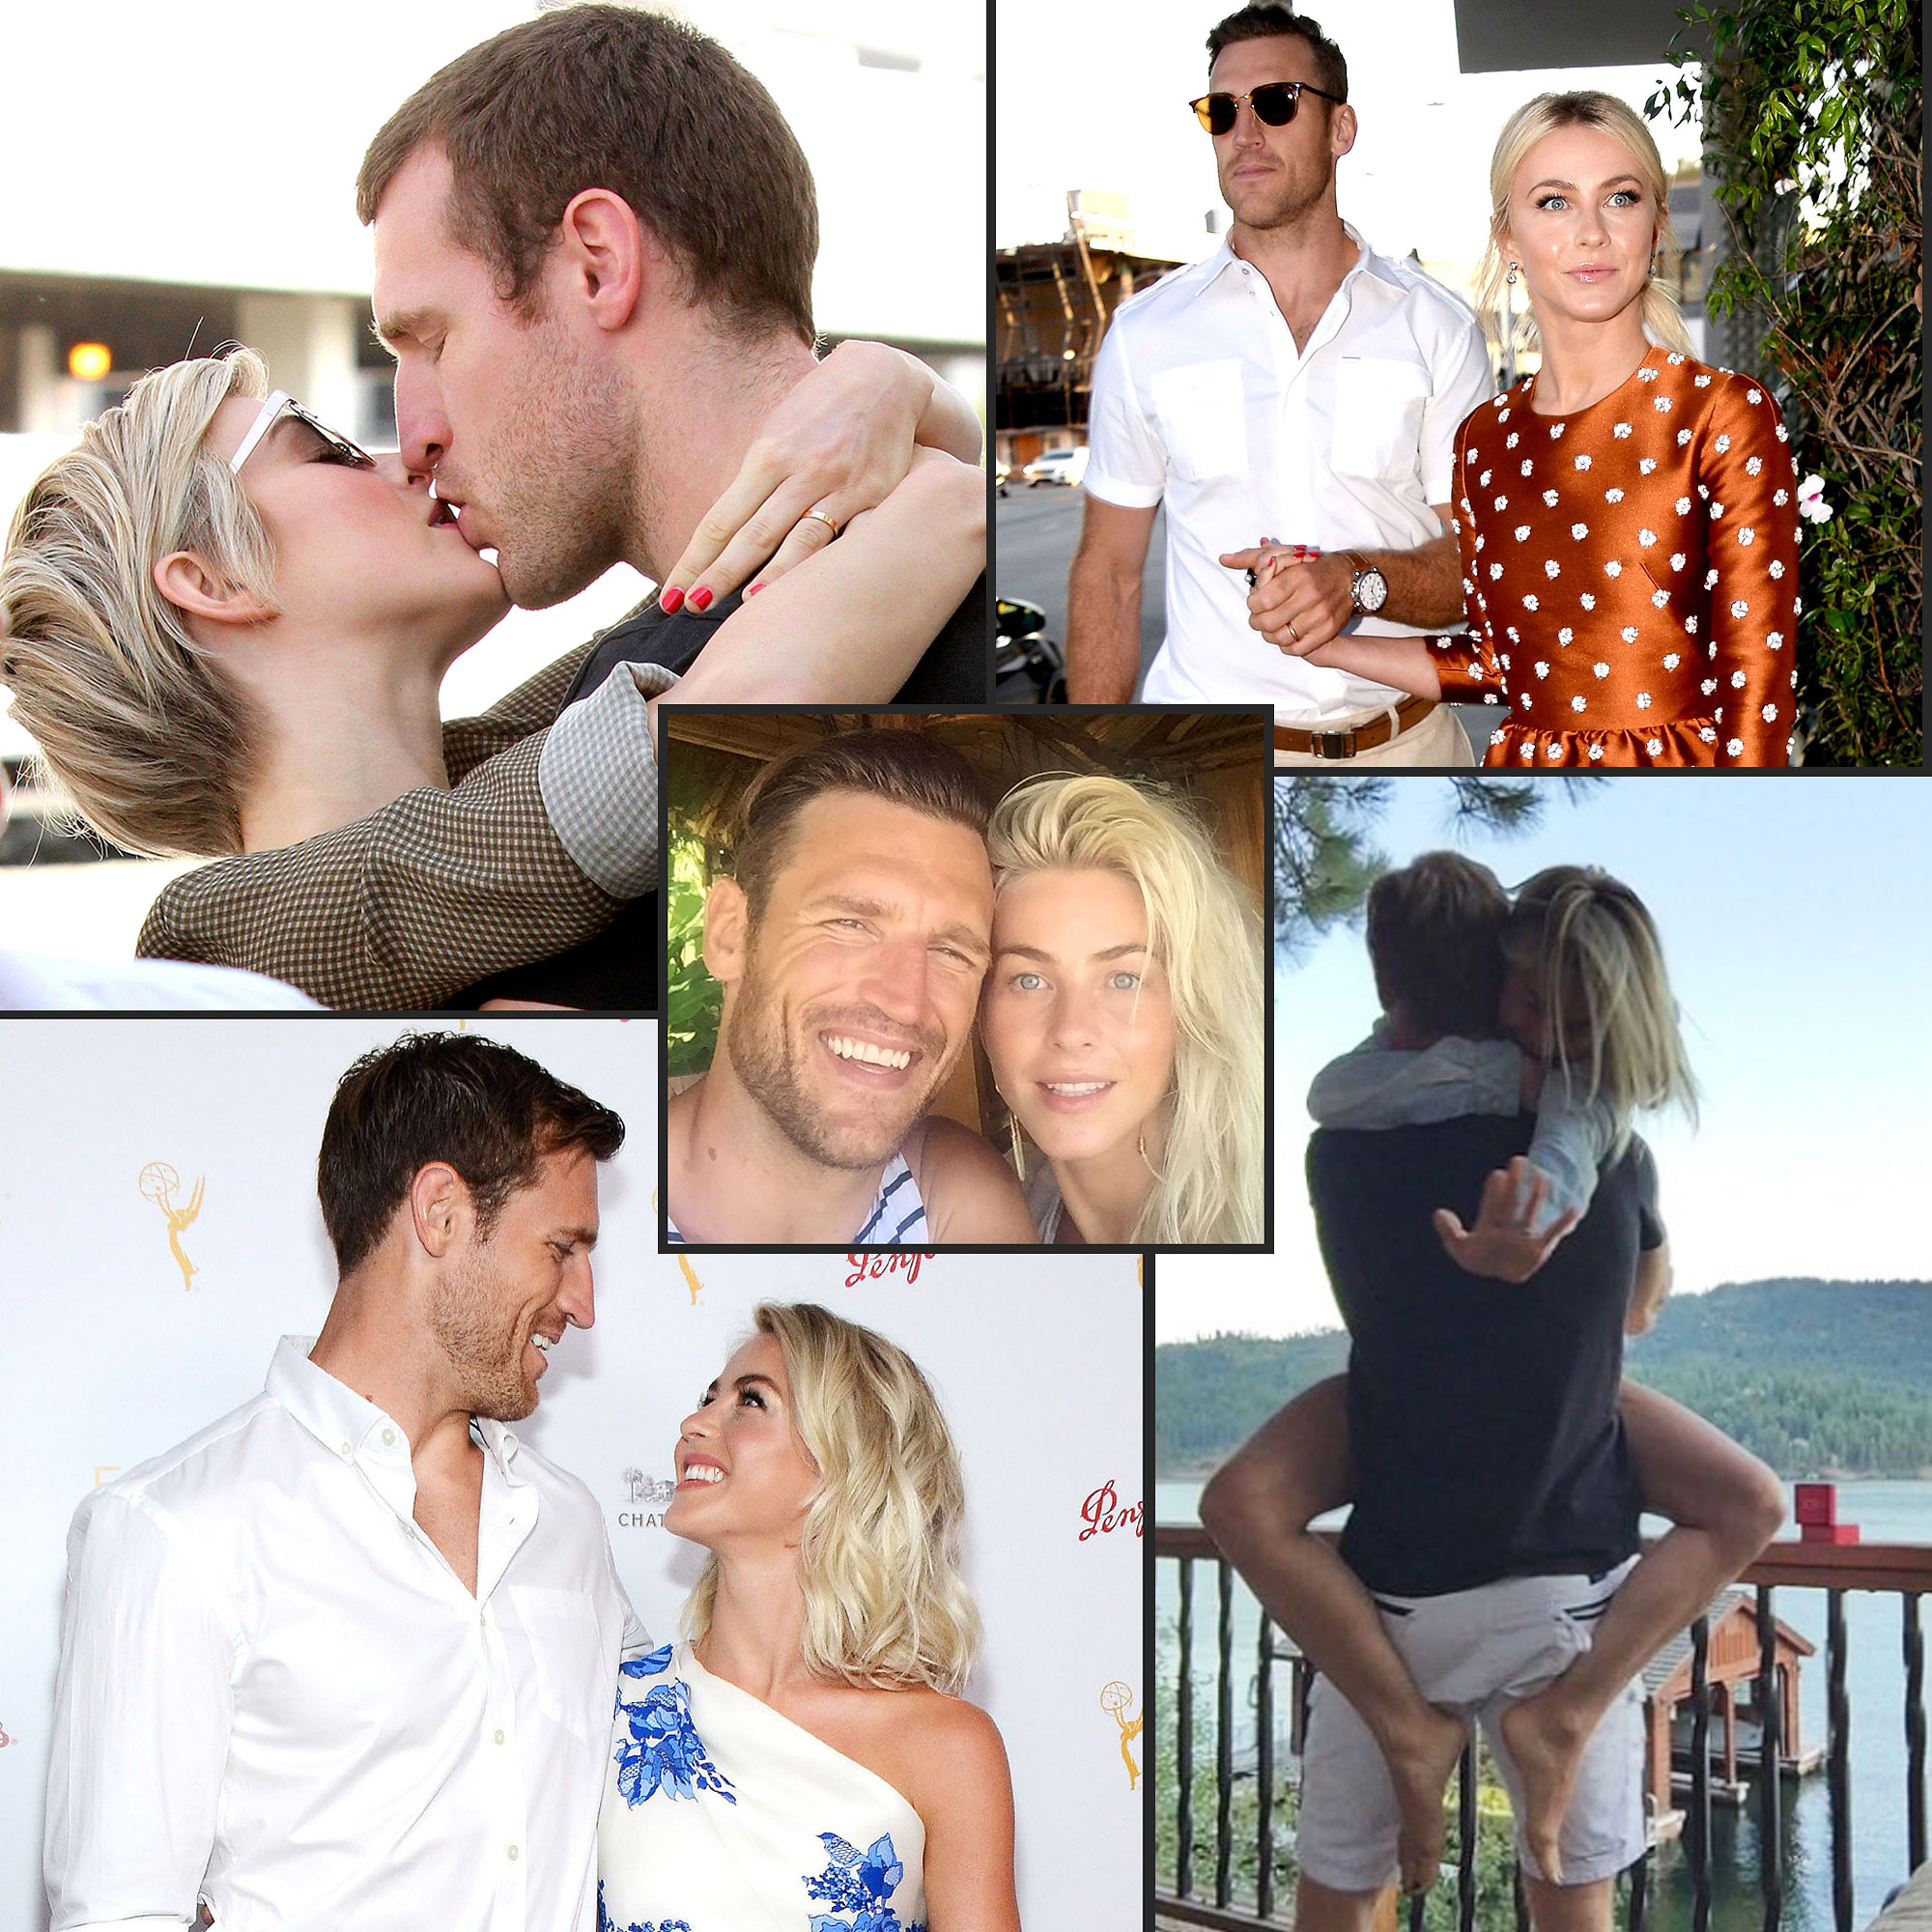 Julianne Hough and Brooks Laich 'Matured Into Different People